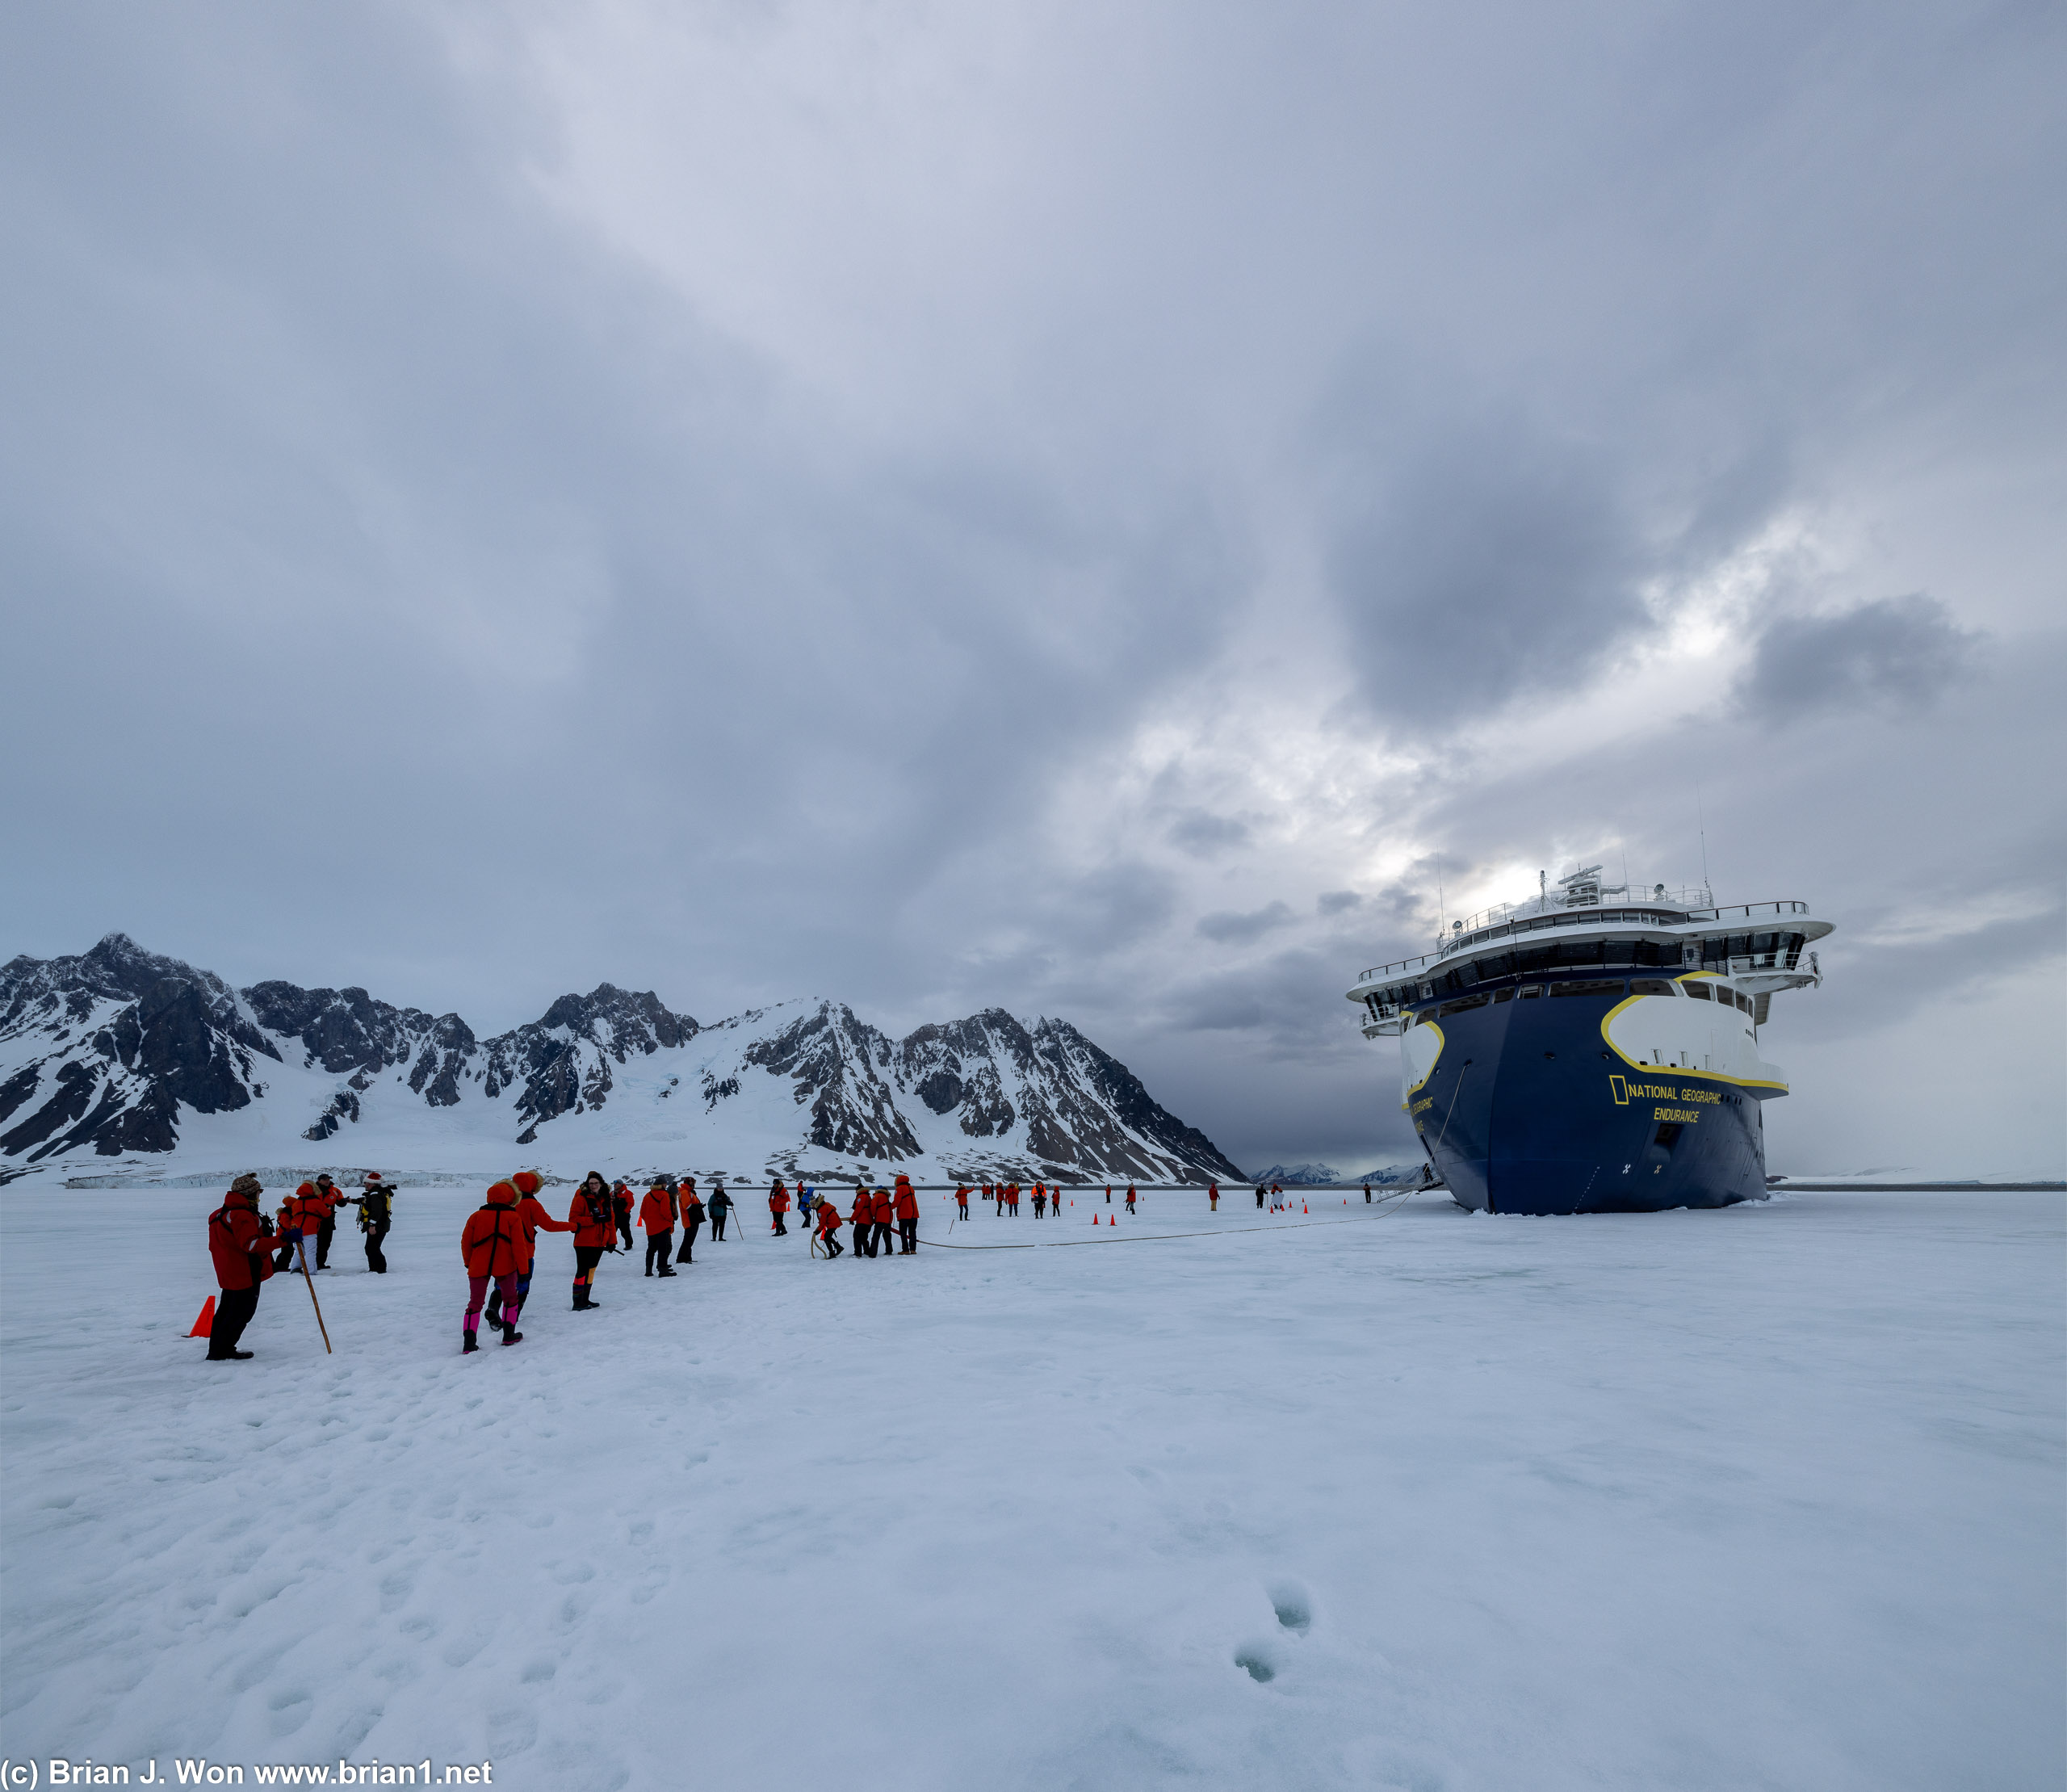 A nearly 13,000GT ship crashed into the ice makes for an impressive sight.